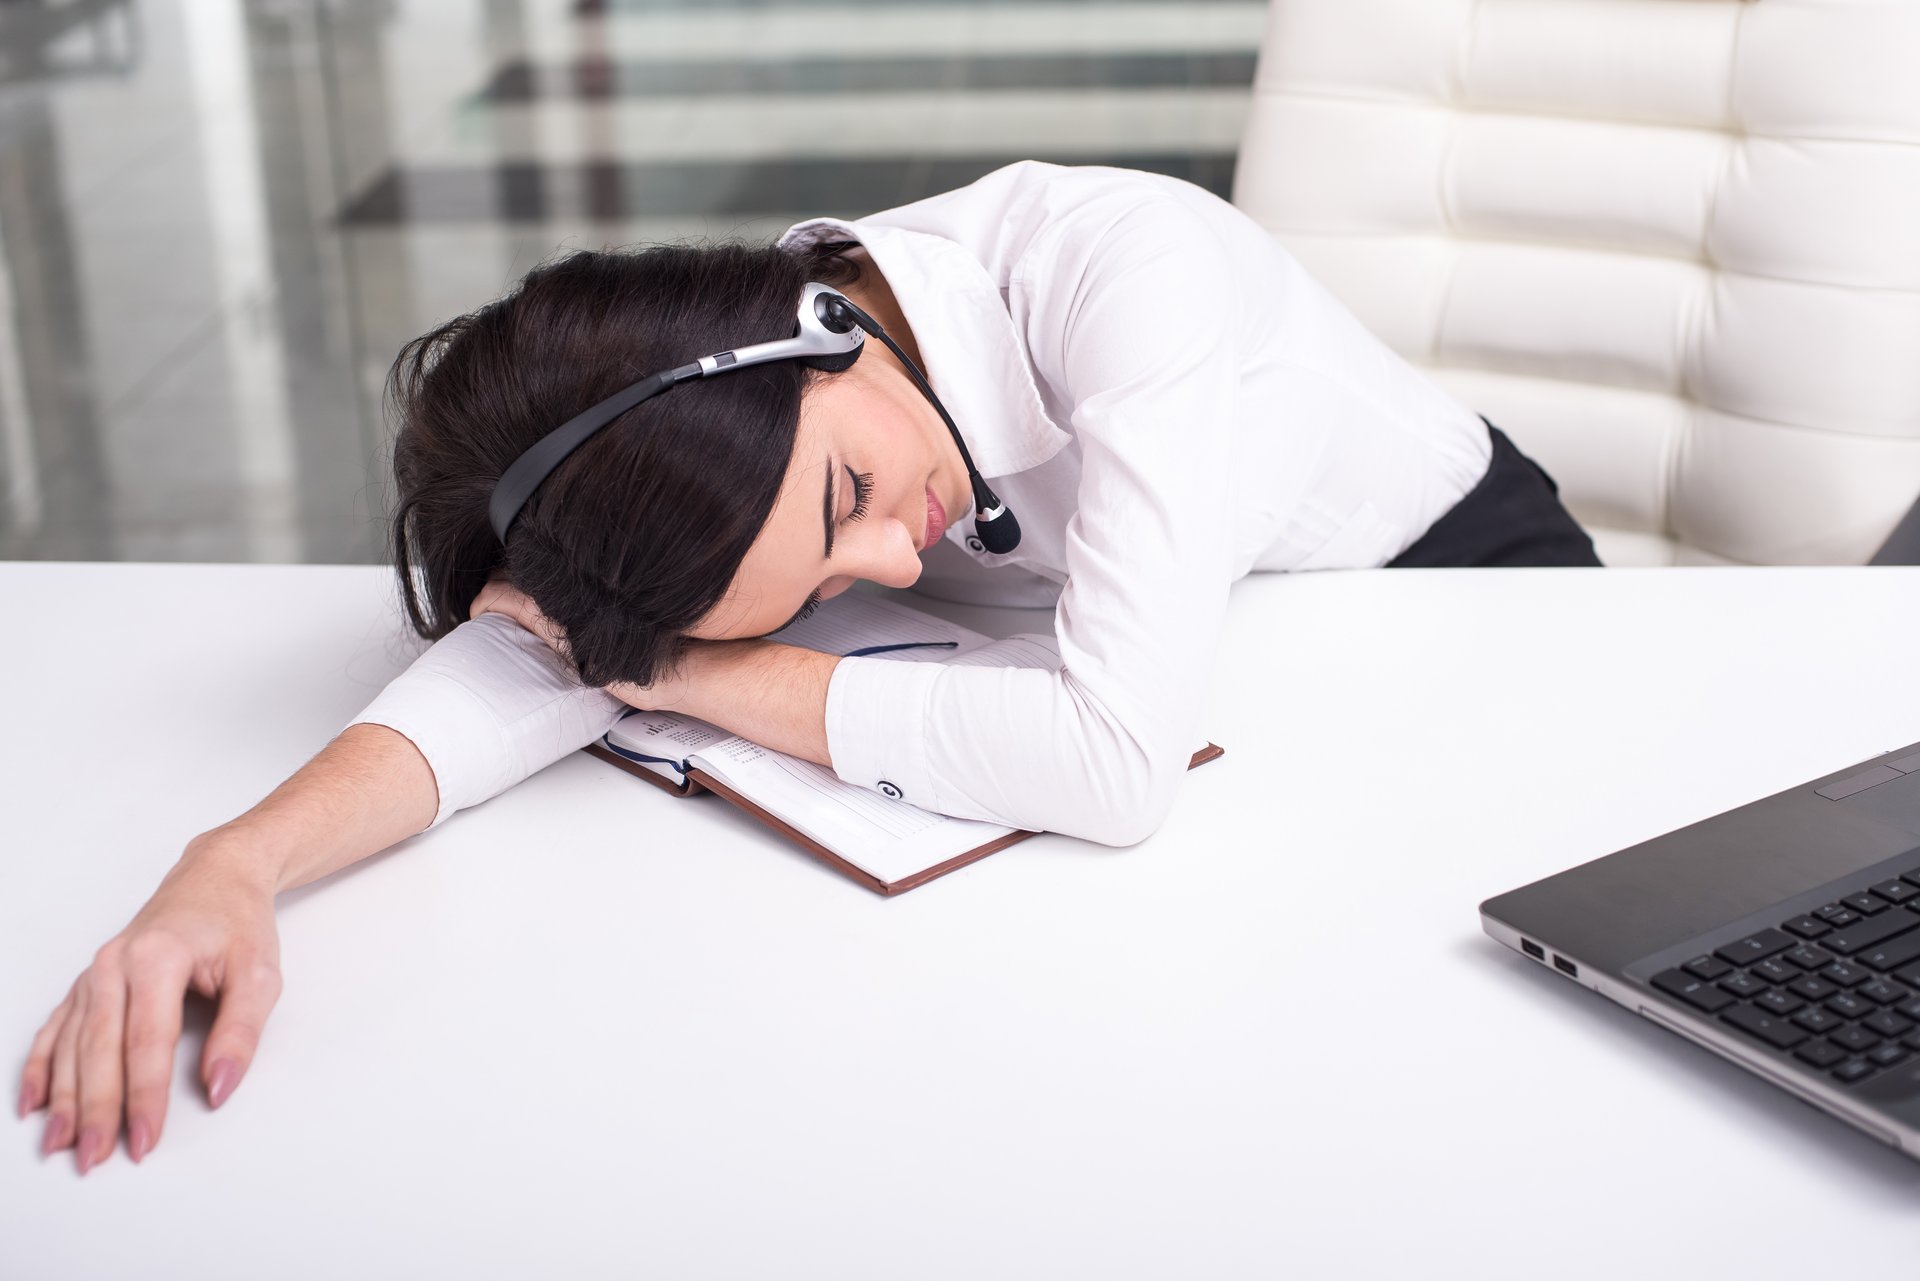 The 10 Most Sleep Deprived Jobs In America